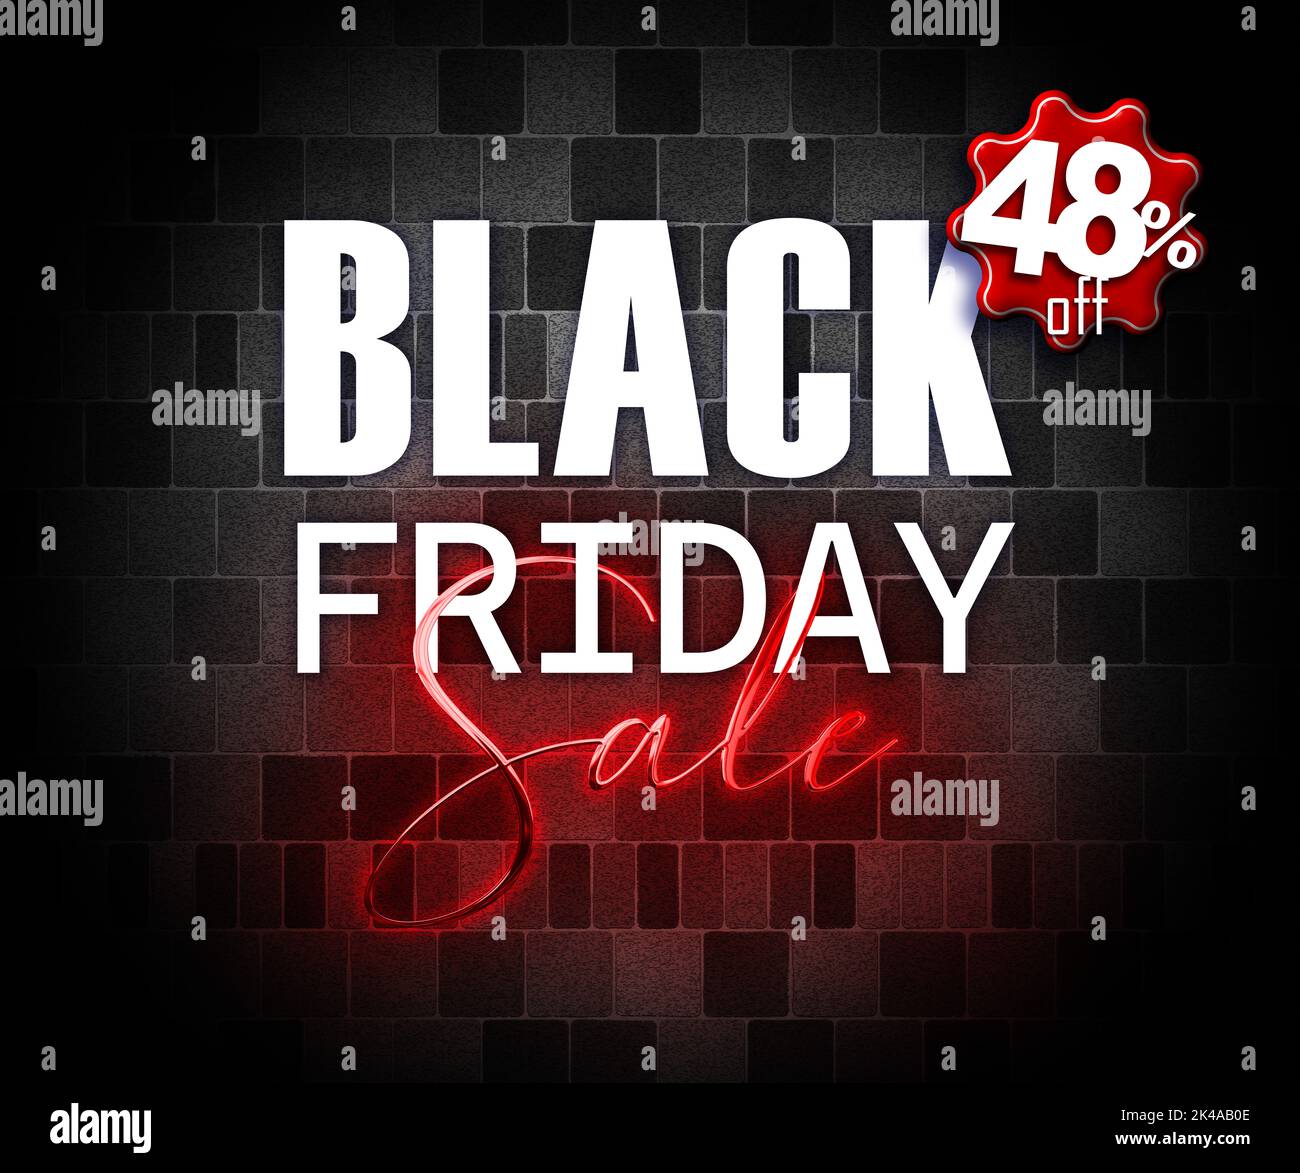 illustration with 3d elements black friday promotion banner 48 percent off sales increase Stock Photo